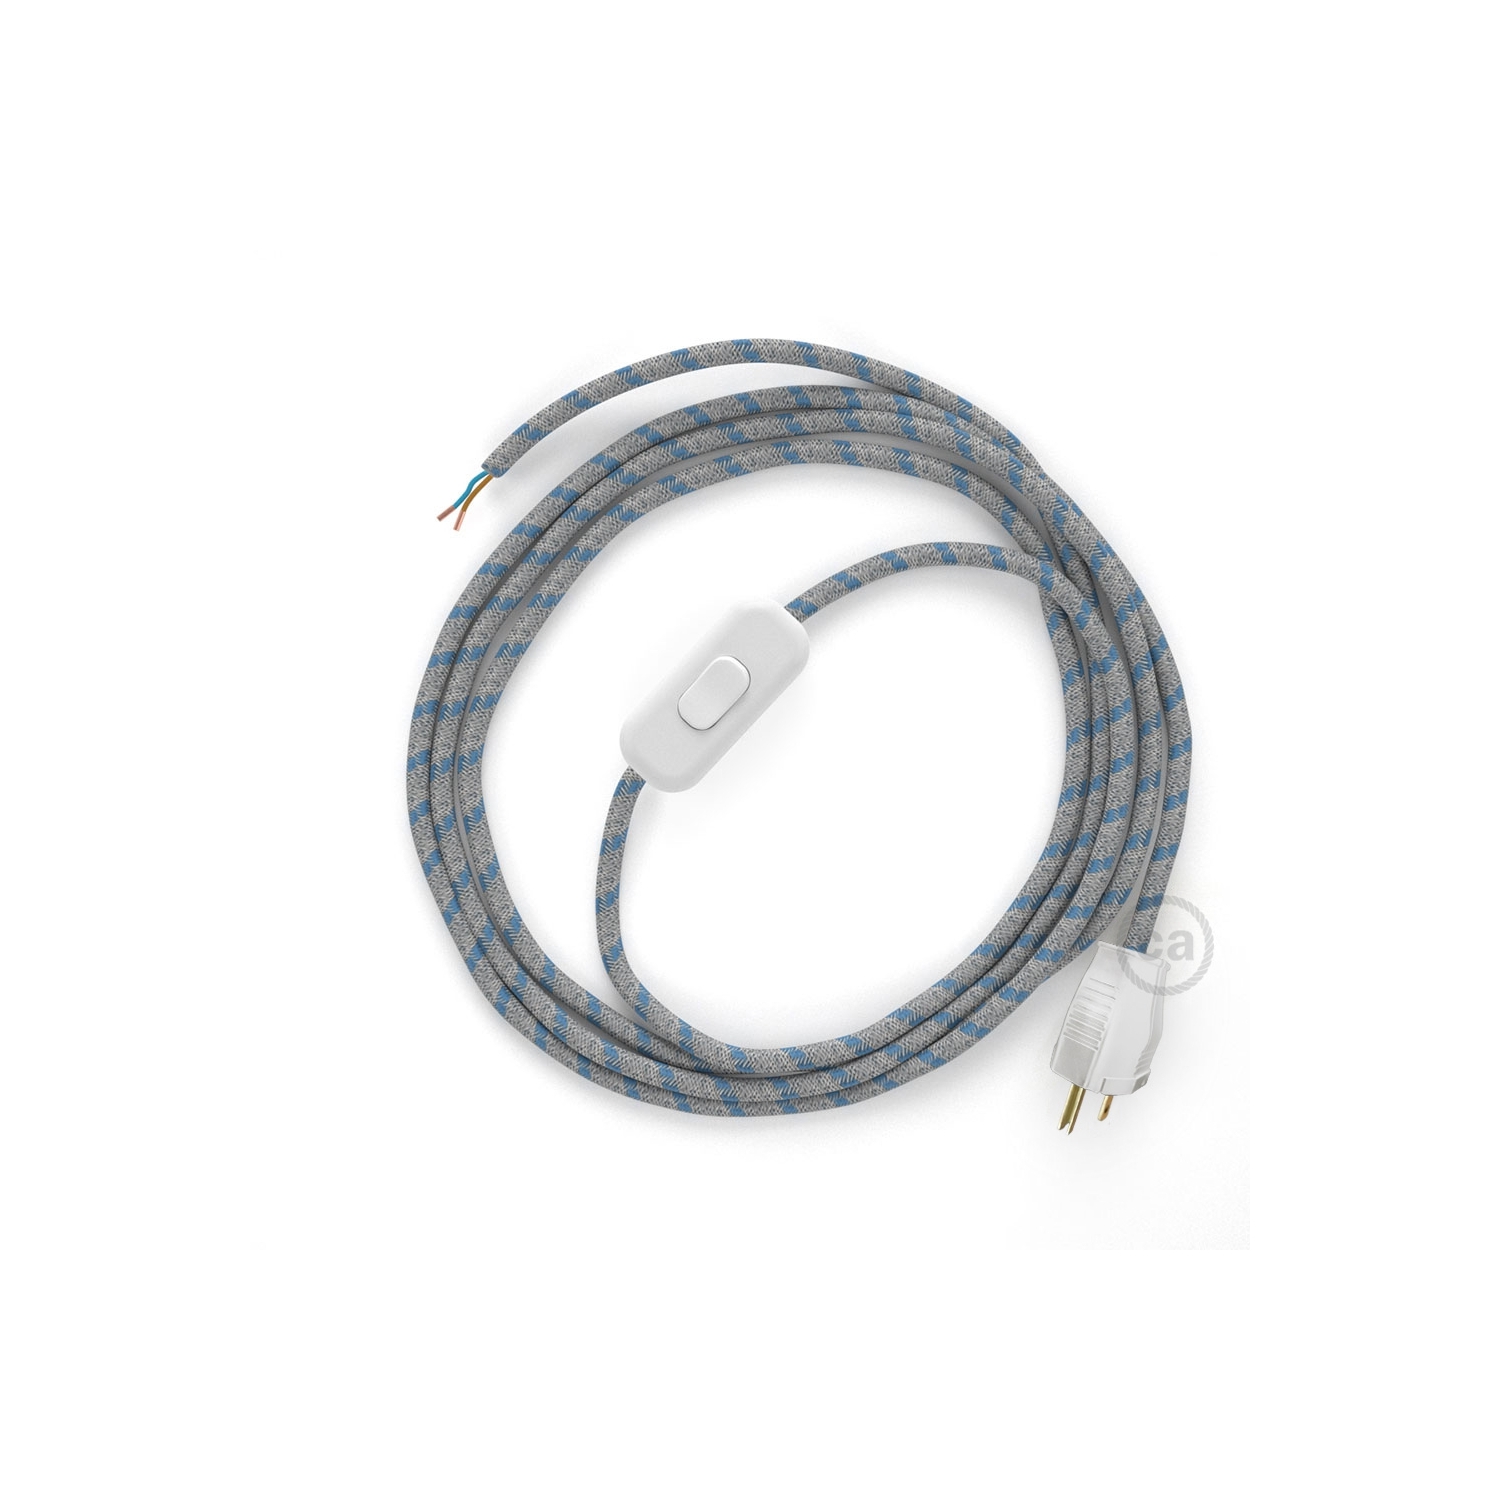 Power Cord with in-line switch, RD55 Natural & Blue Linen Stripe - Choose color of switch/plug